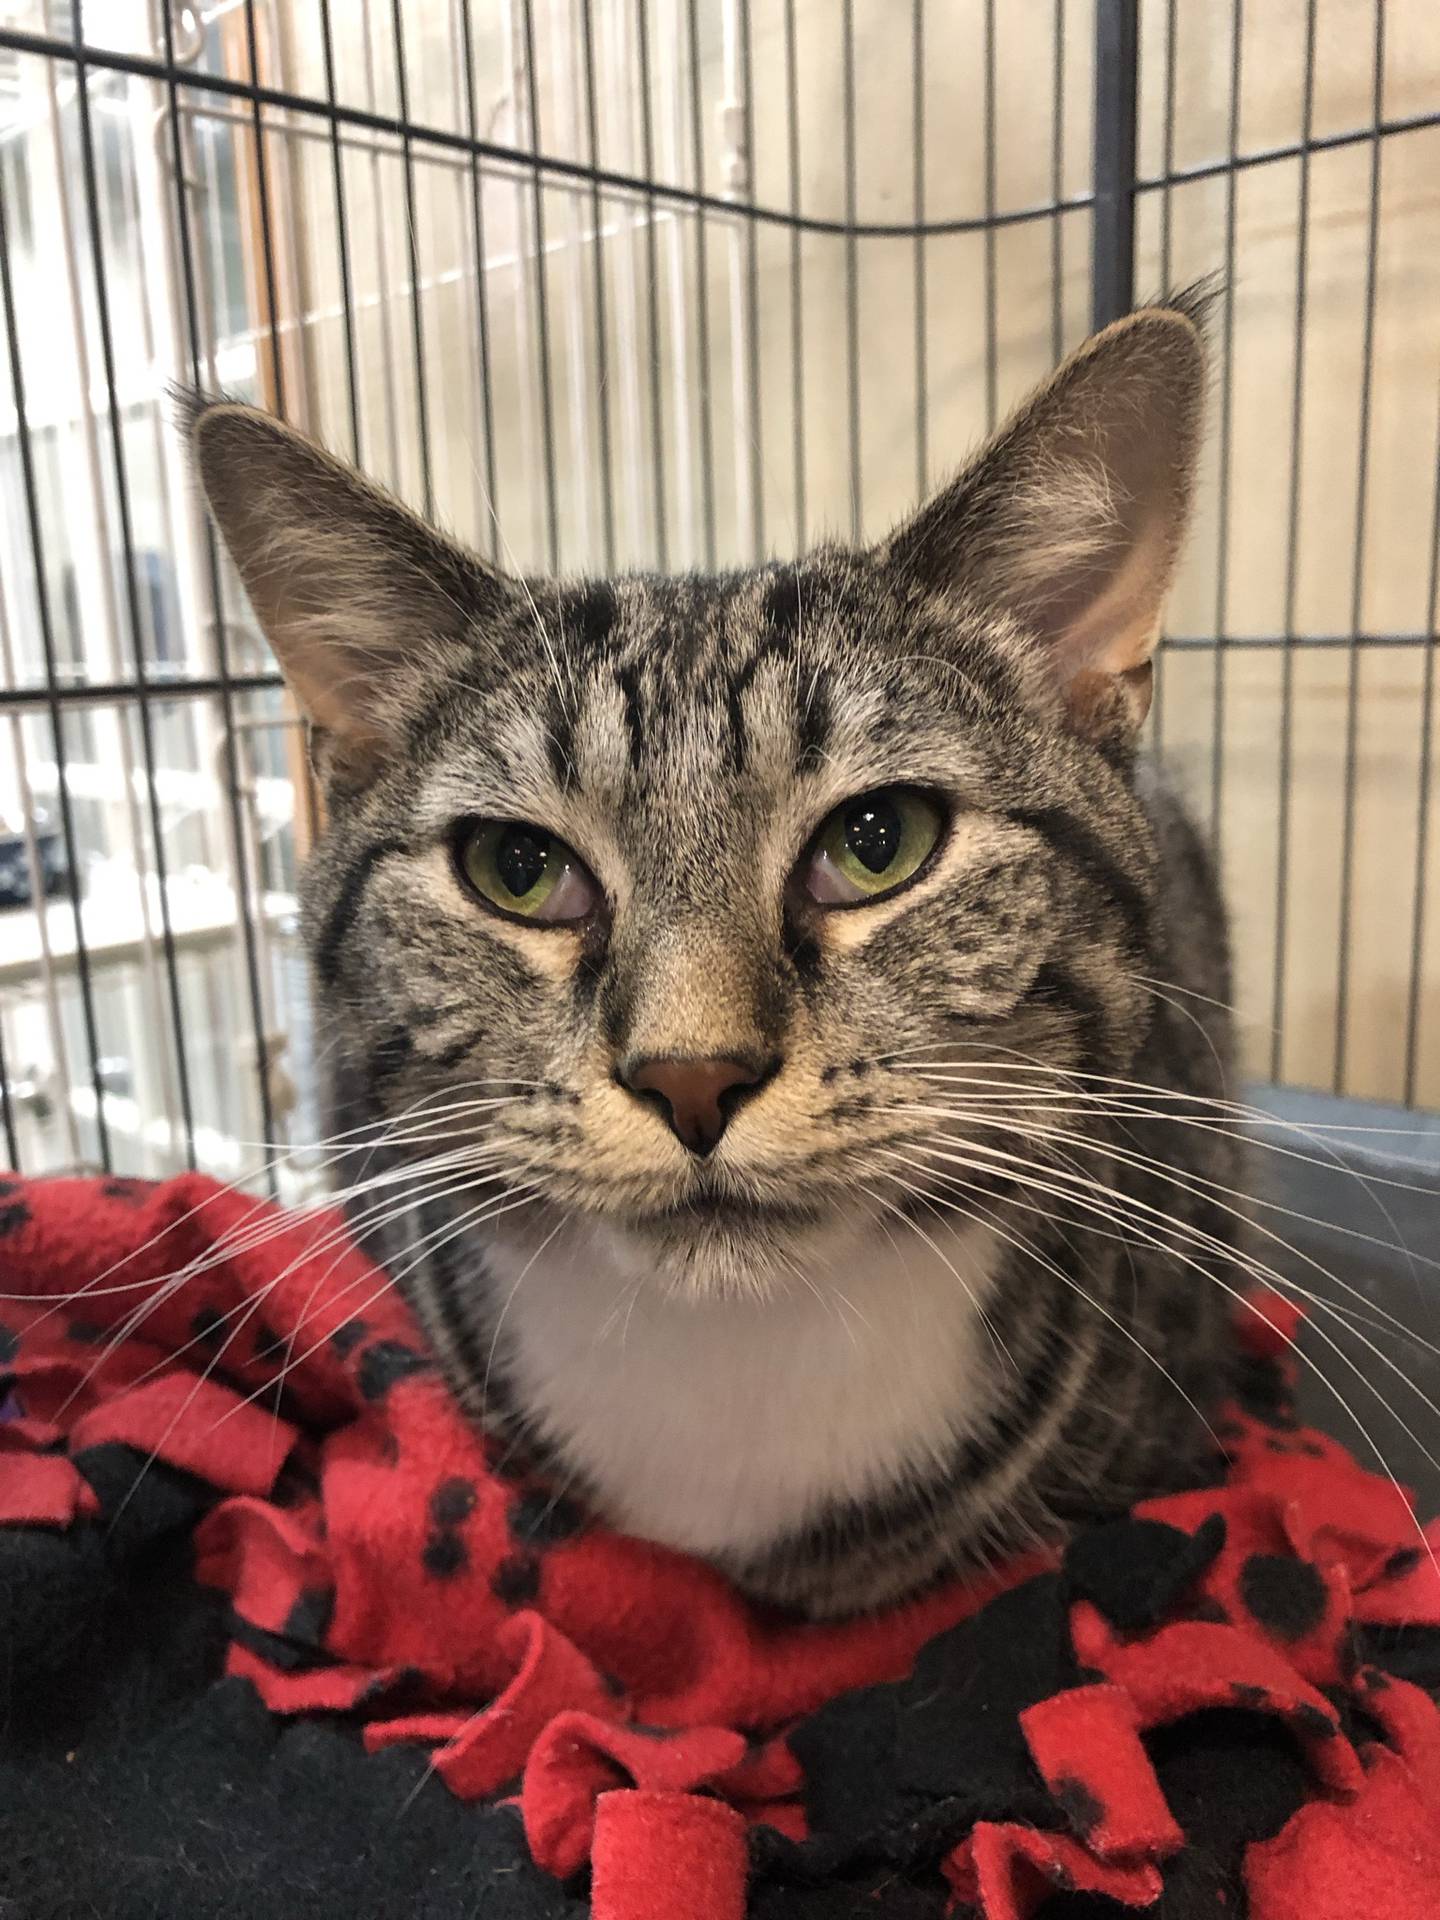 Jasper is a 1-year-tabby with soft fur and impressive whiskers. He is a quiet and calm likes gentle pets and attention. Jasper can be reserved when nervous, and he needs a patient adopter that will encourage him to come out of his shell. To meet Jasper, email Catadoptions@nawsus.org. Visit nawsus.org.